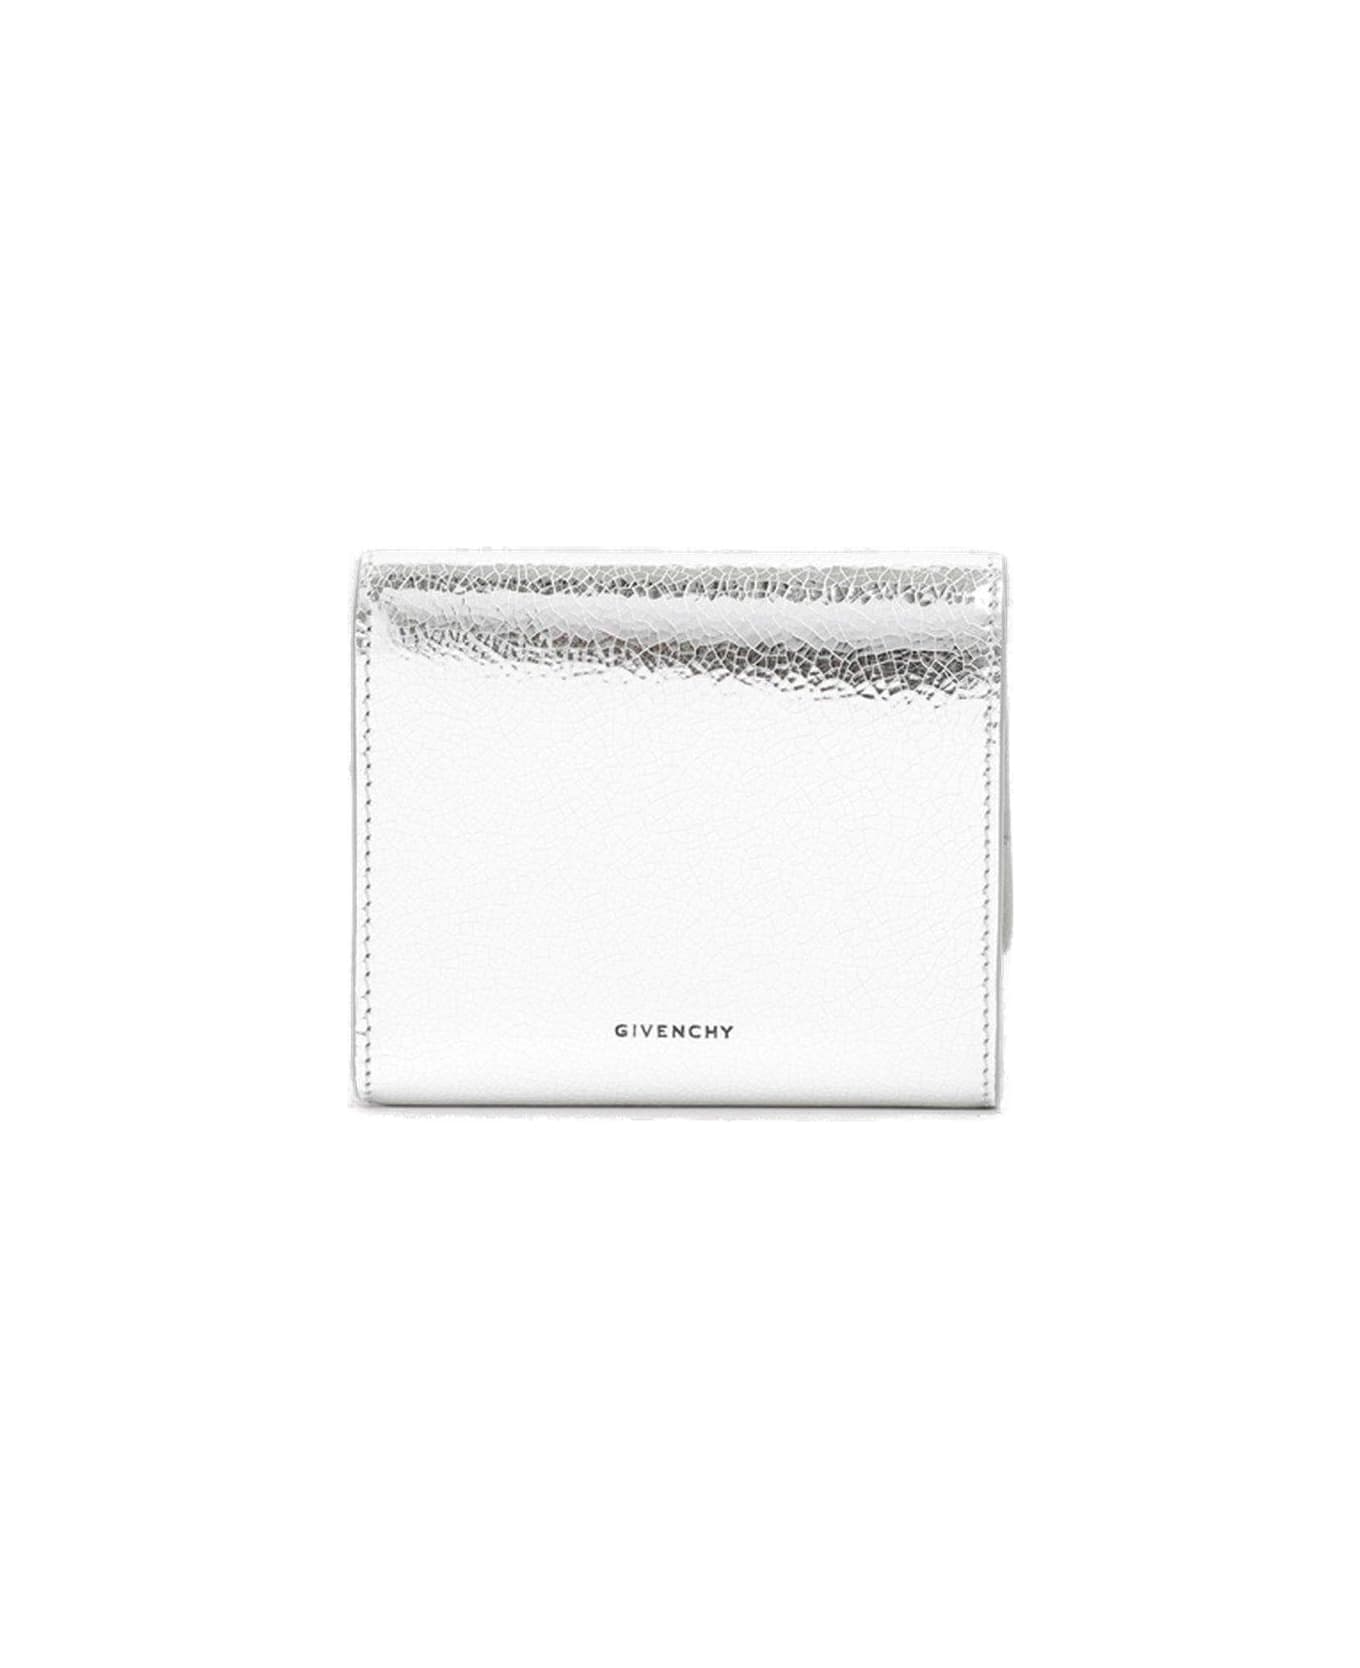 Givenchy 4g Trifold Wallet